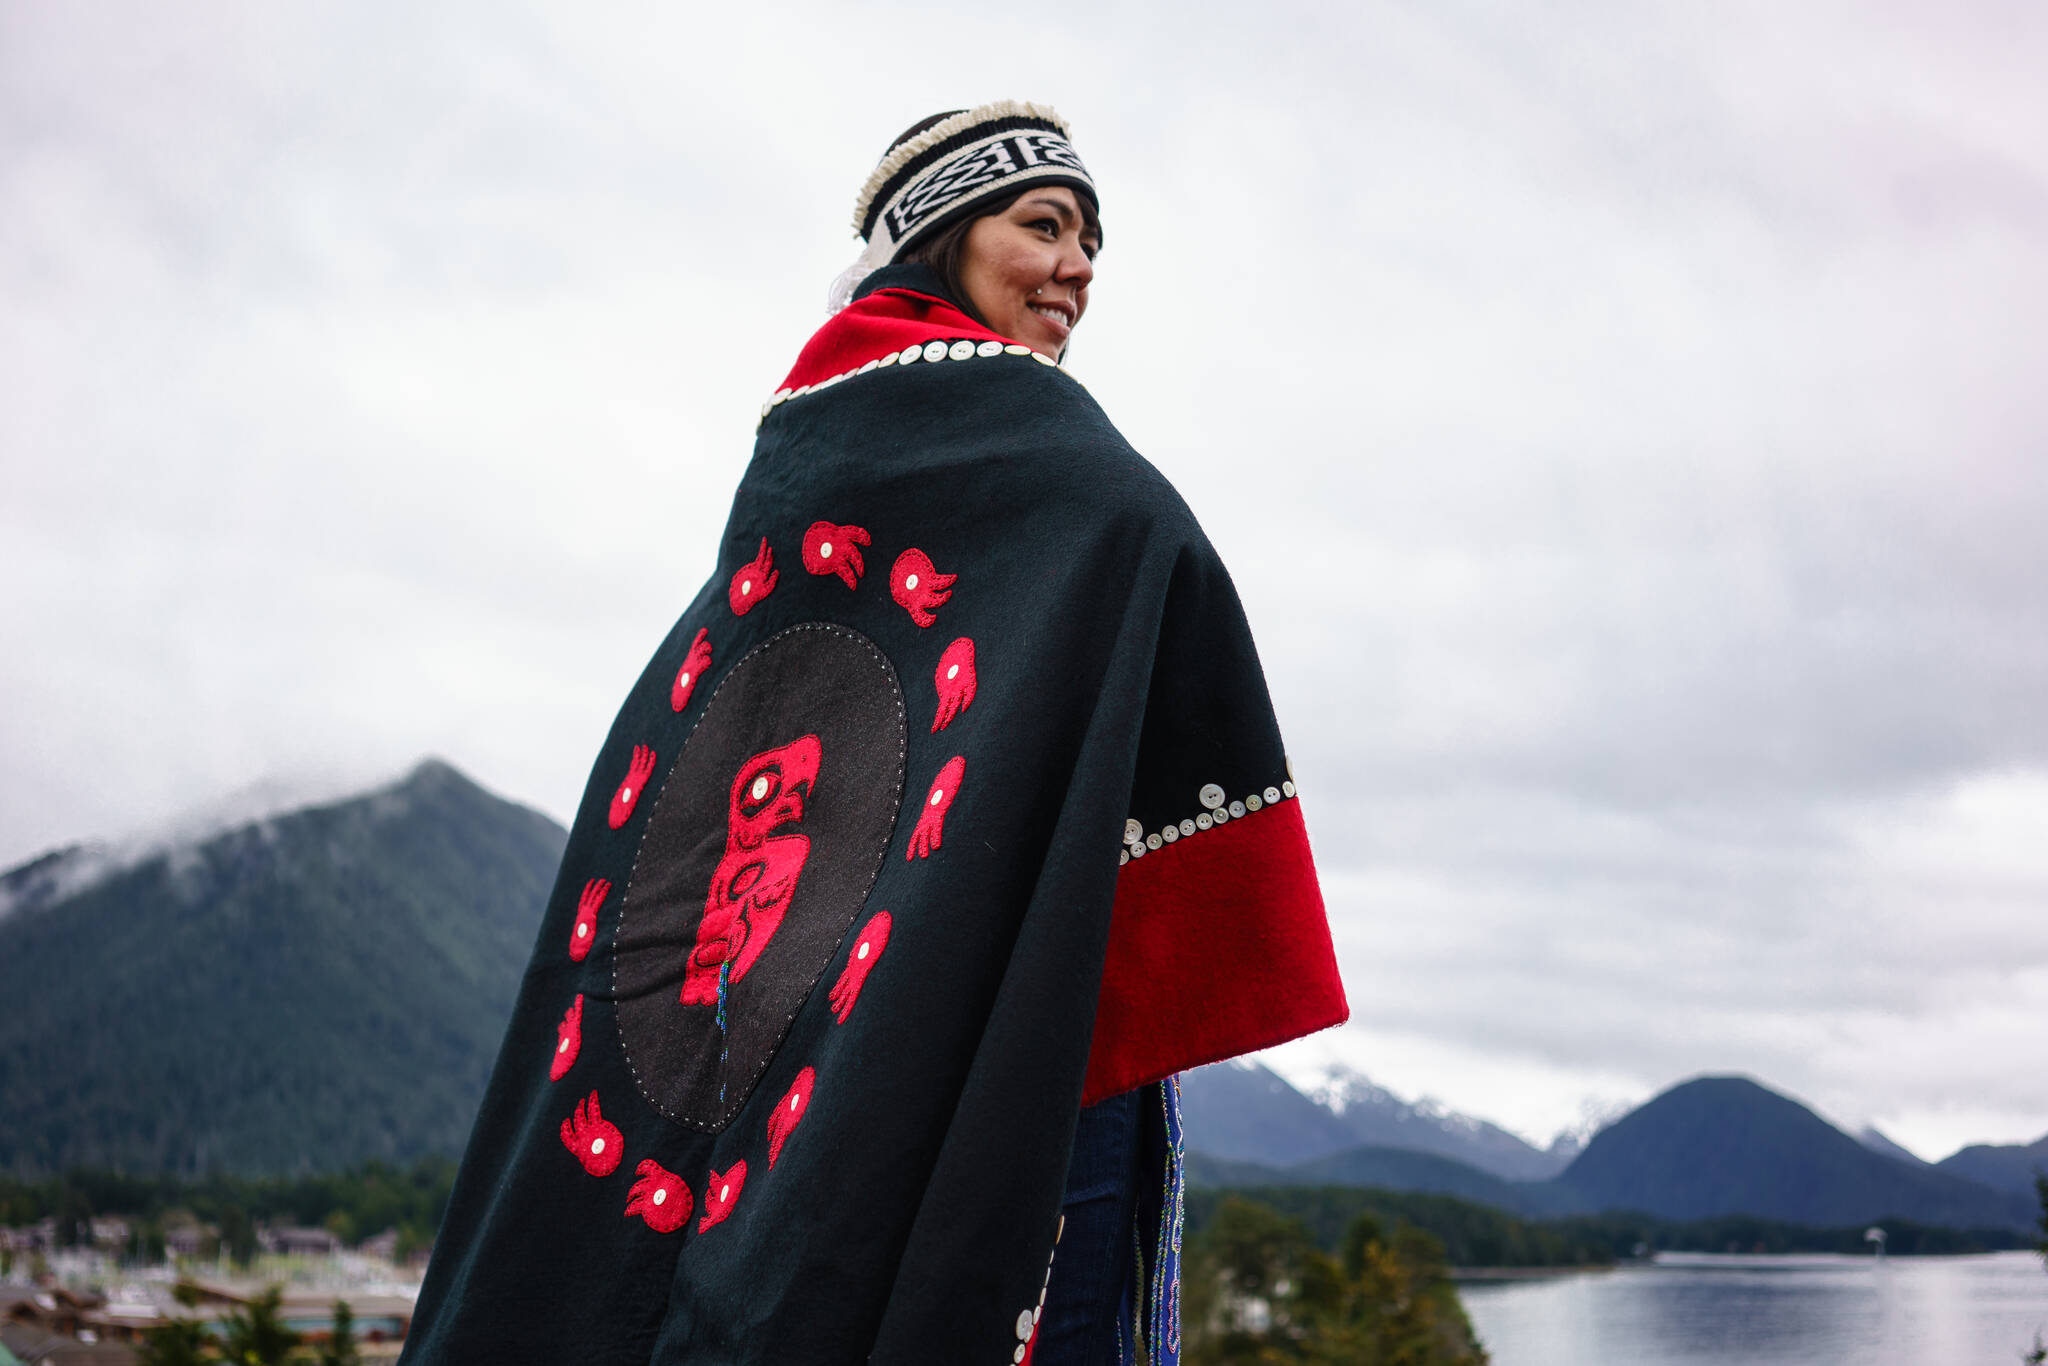 Angela, who is Tlingit and Tsimshian, weaves her values into every aspect of her business: she serves as a role model for Native youth by teaching classes on espresso-making to local students, protects the environment by using compostable packaging, and supports the economy by producing her chocolates locally. (Courtesy Photo / Bethany Goodrich)